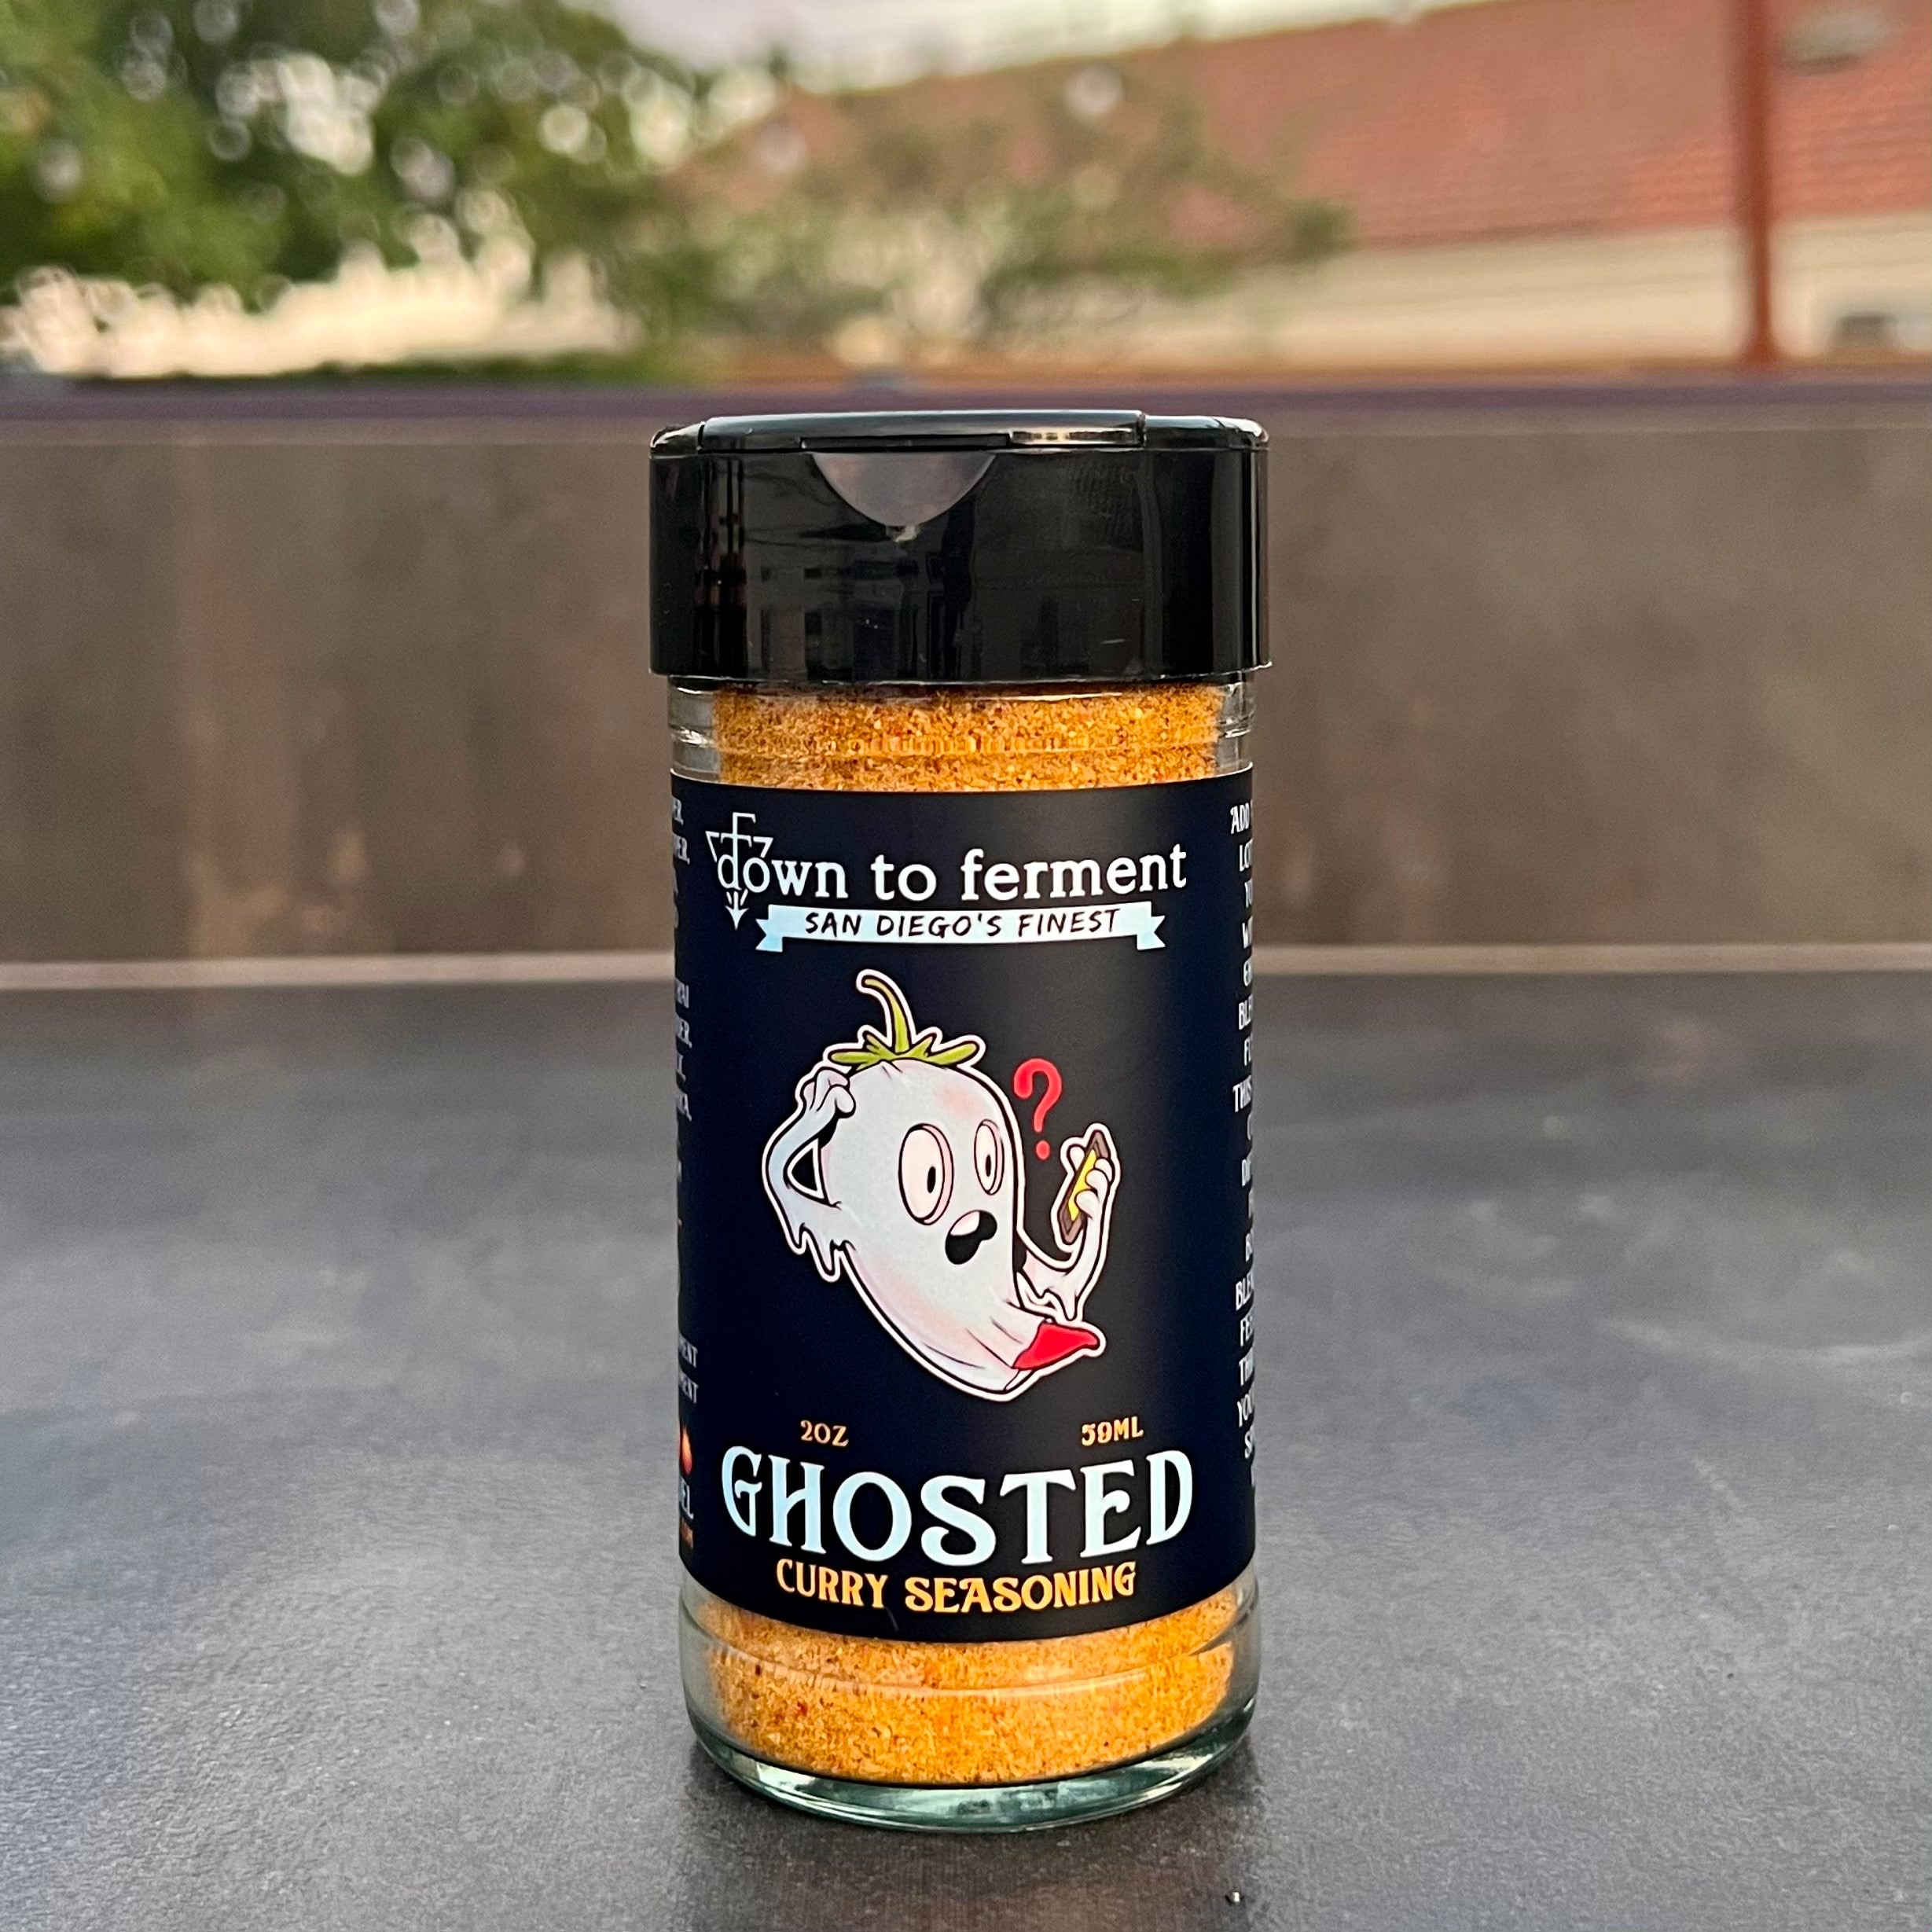 San Diego Hot Sauce, Ghosted Curry Seasoning - Down to Ferment